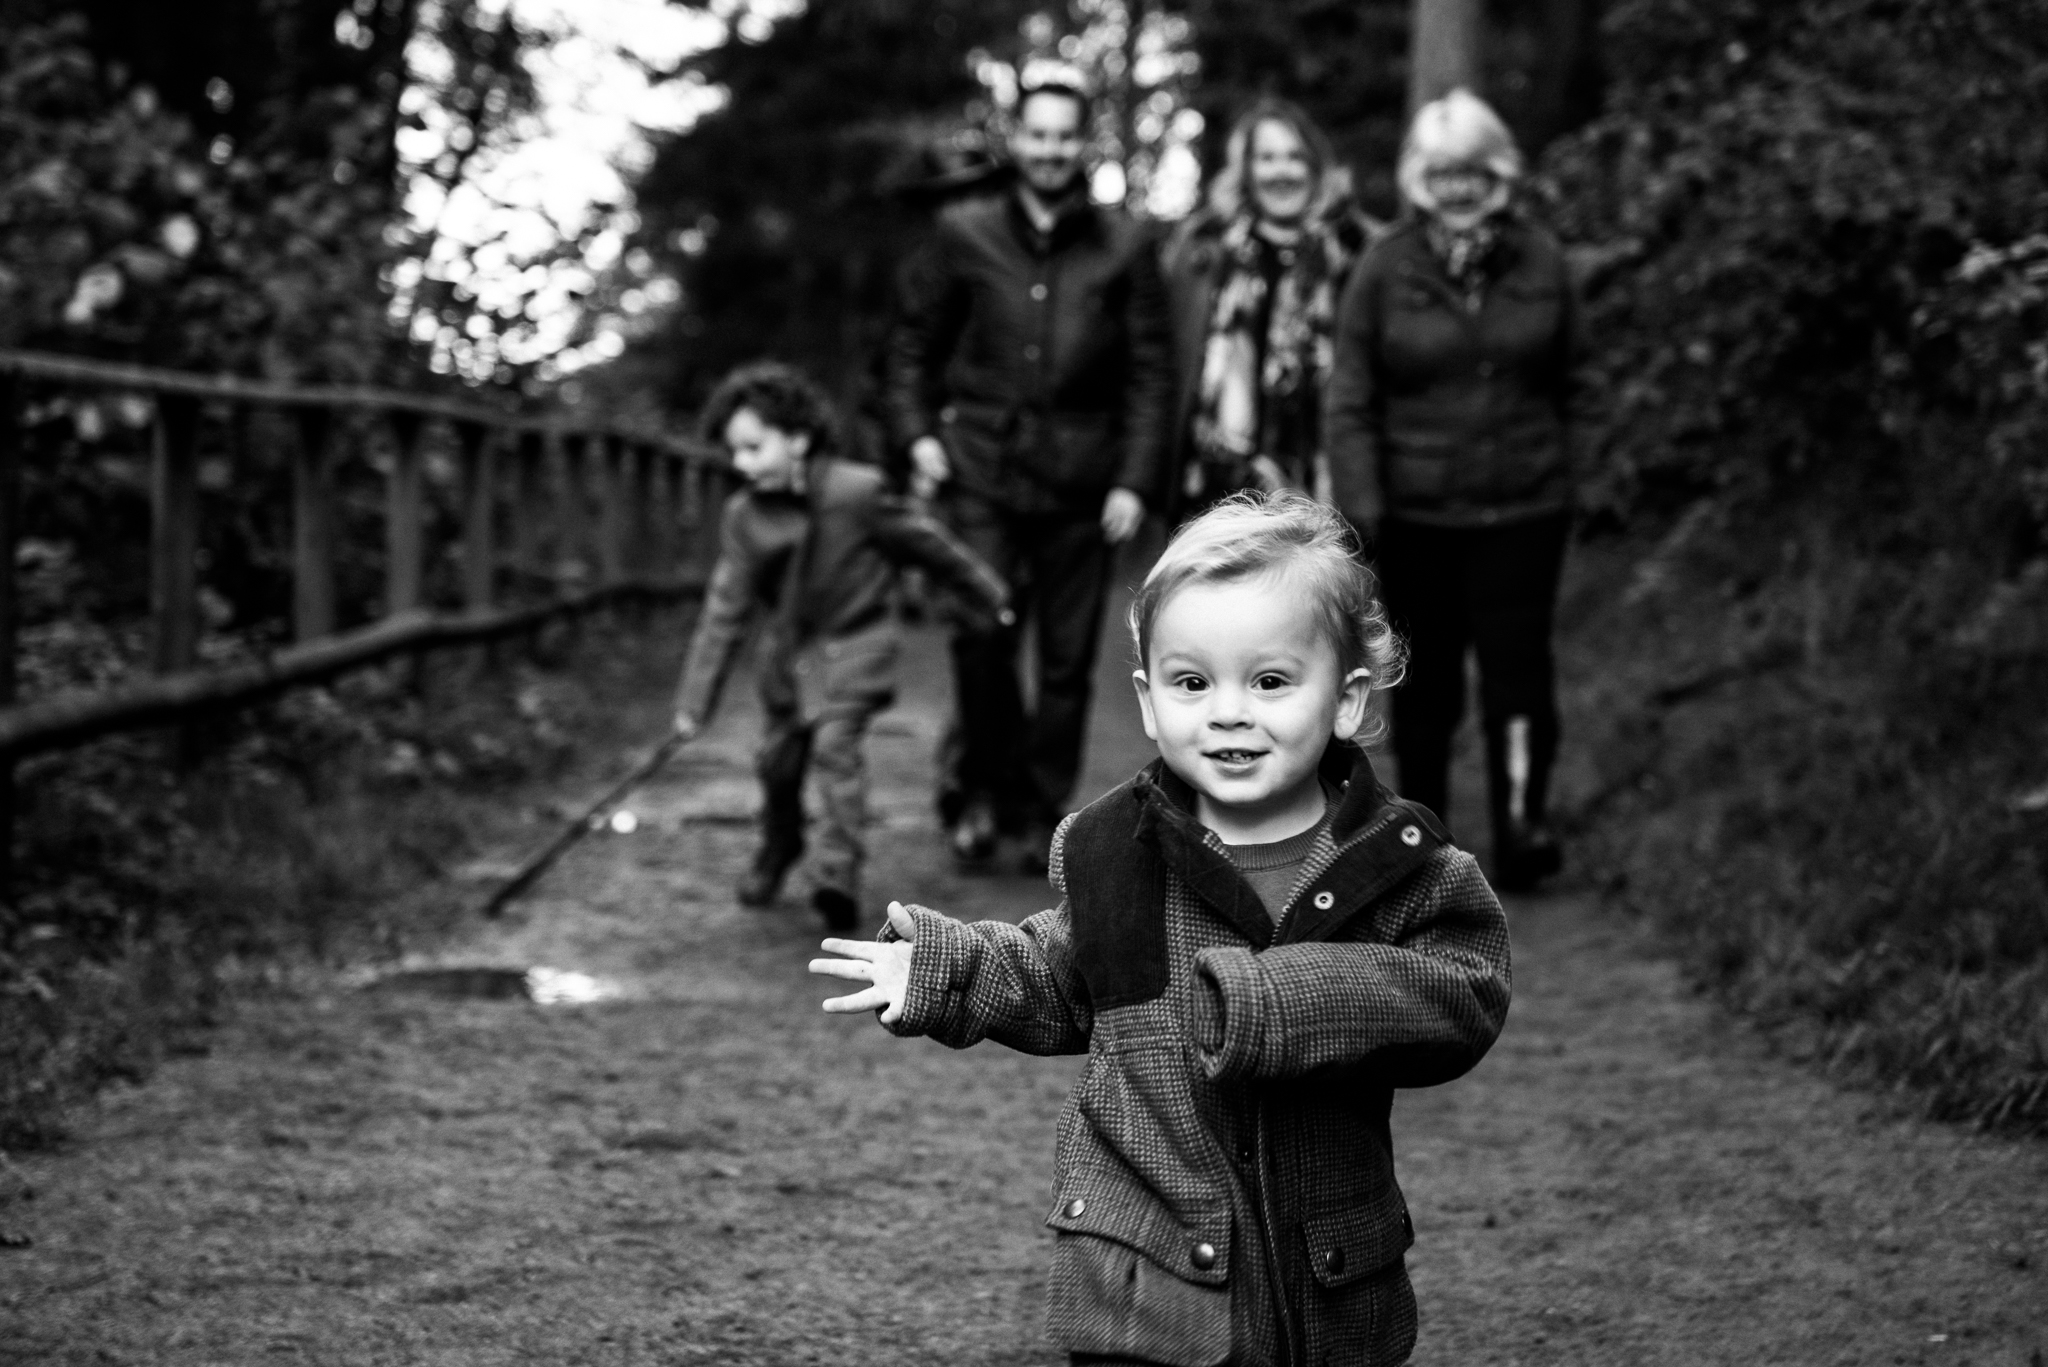 Autumn Documentary Lifestyle Family Photography at Clent Hills, Worcestershire Country Park countryside outdoors nature - Jenny Harper-10.jpg